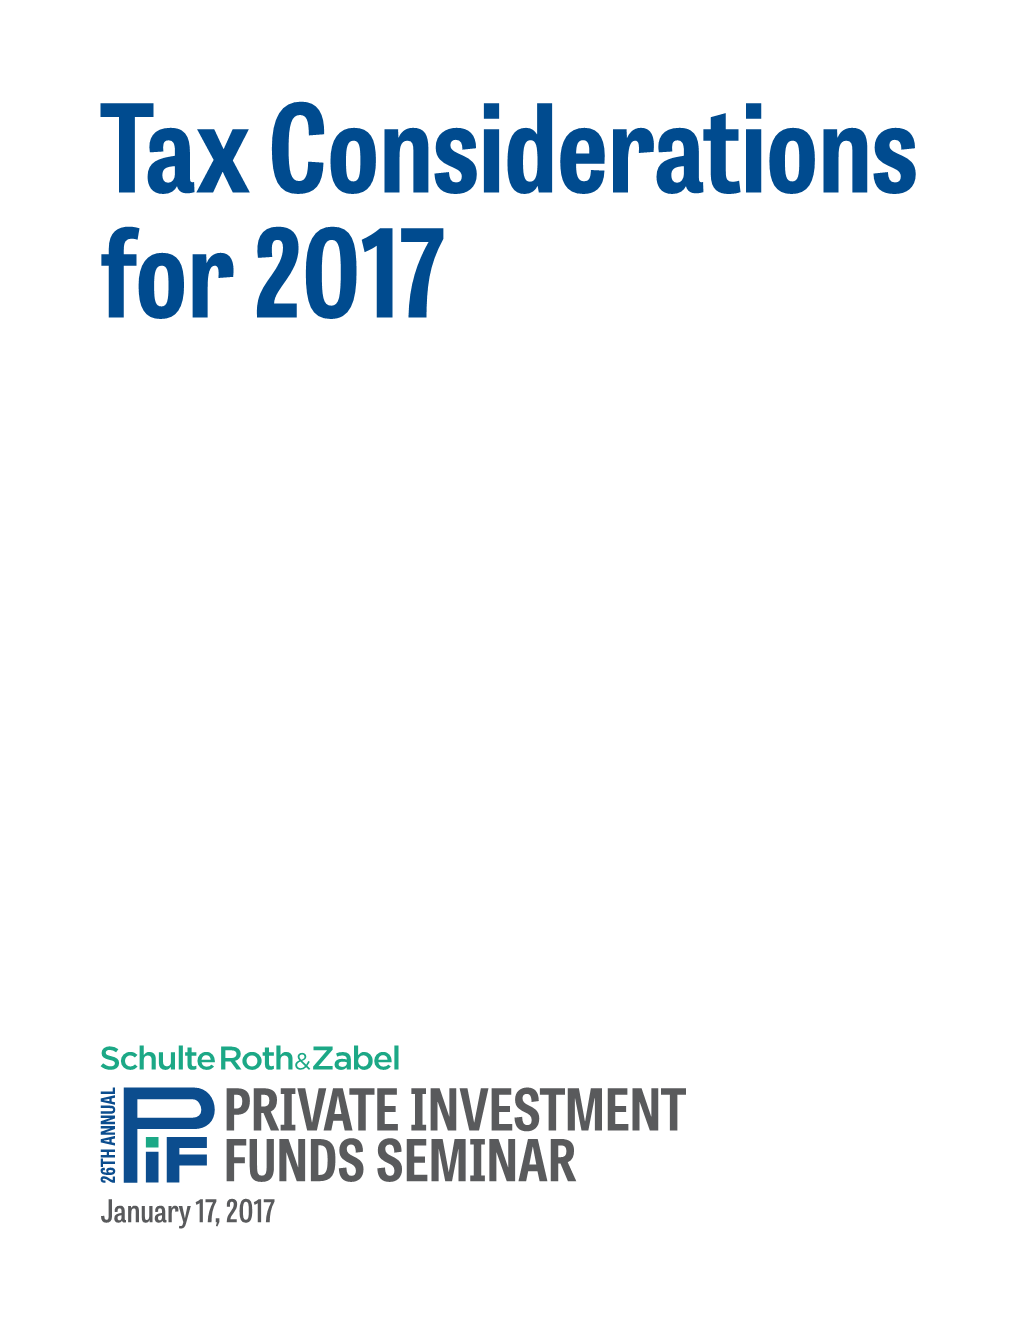 Tax Considerations for 2017